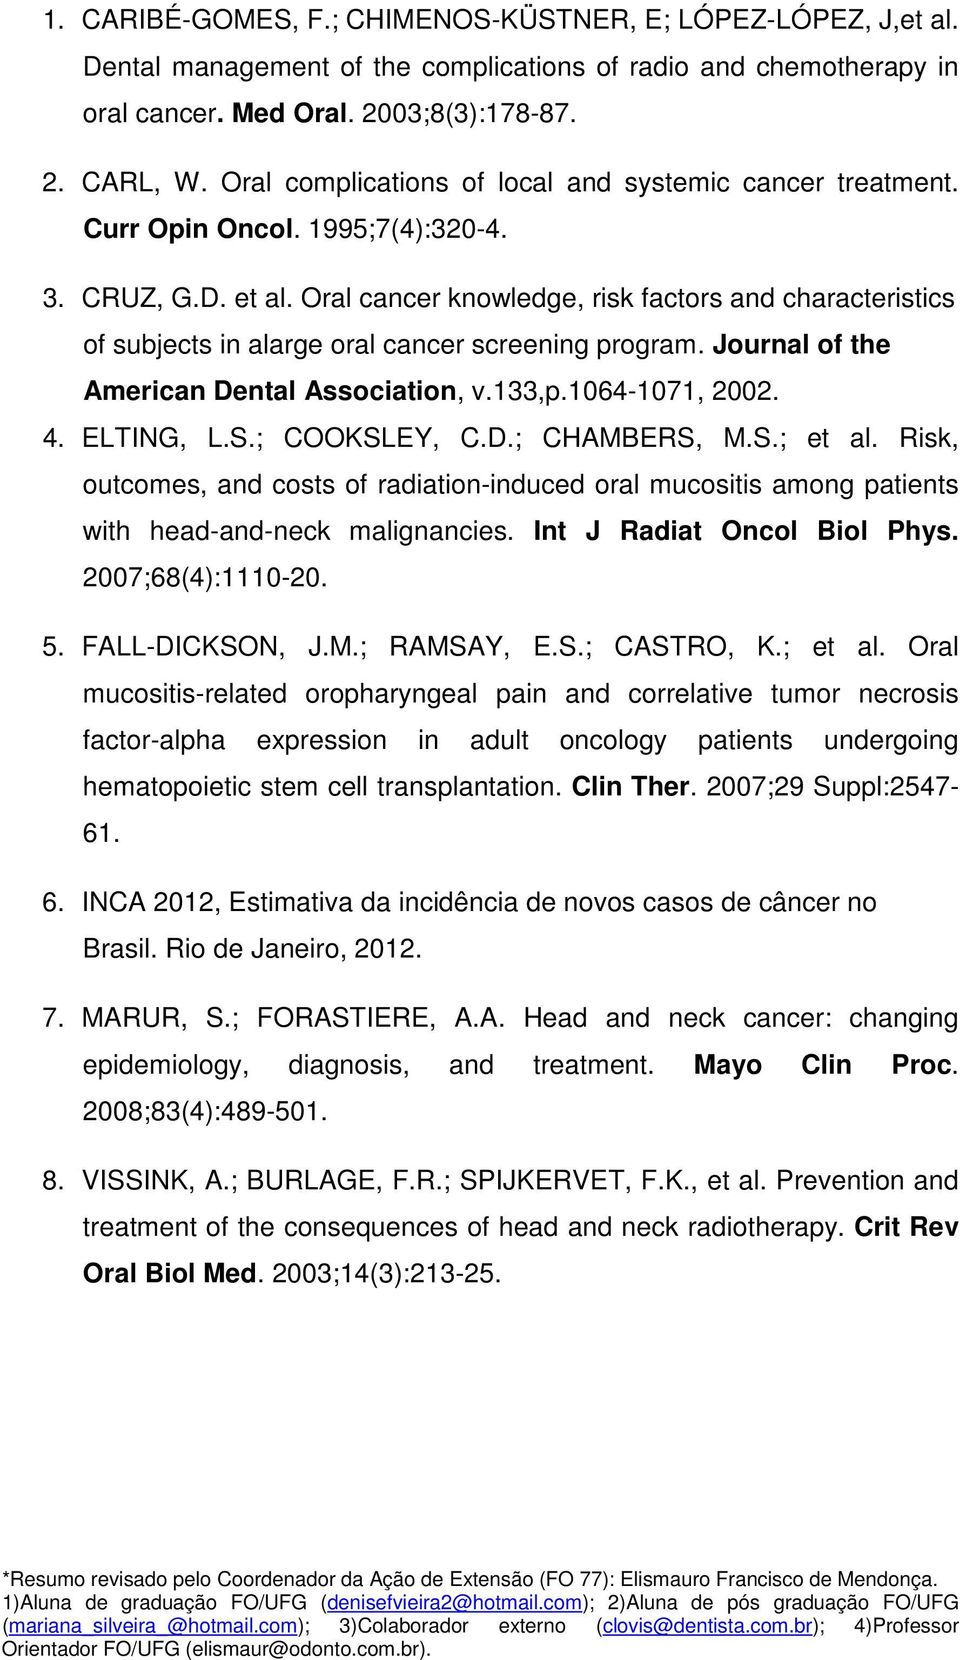 Oral cancer knowledge, risk factors and characteristics of subjects in alarge oral cancer screening program. Journal of the American Dental Association, v.133,p.1064-1071, 2002. 4. ELTING, L.S.